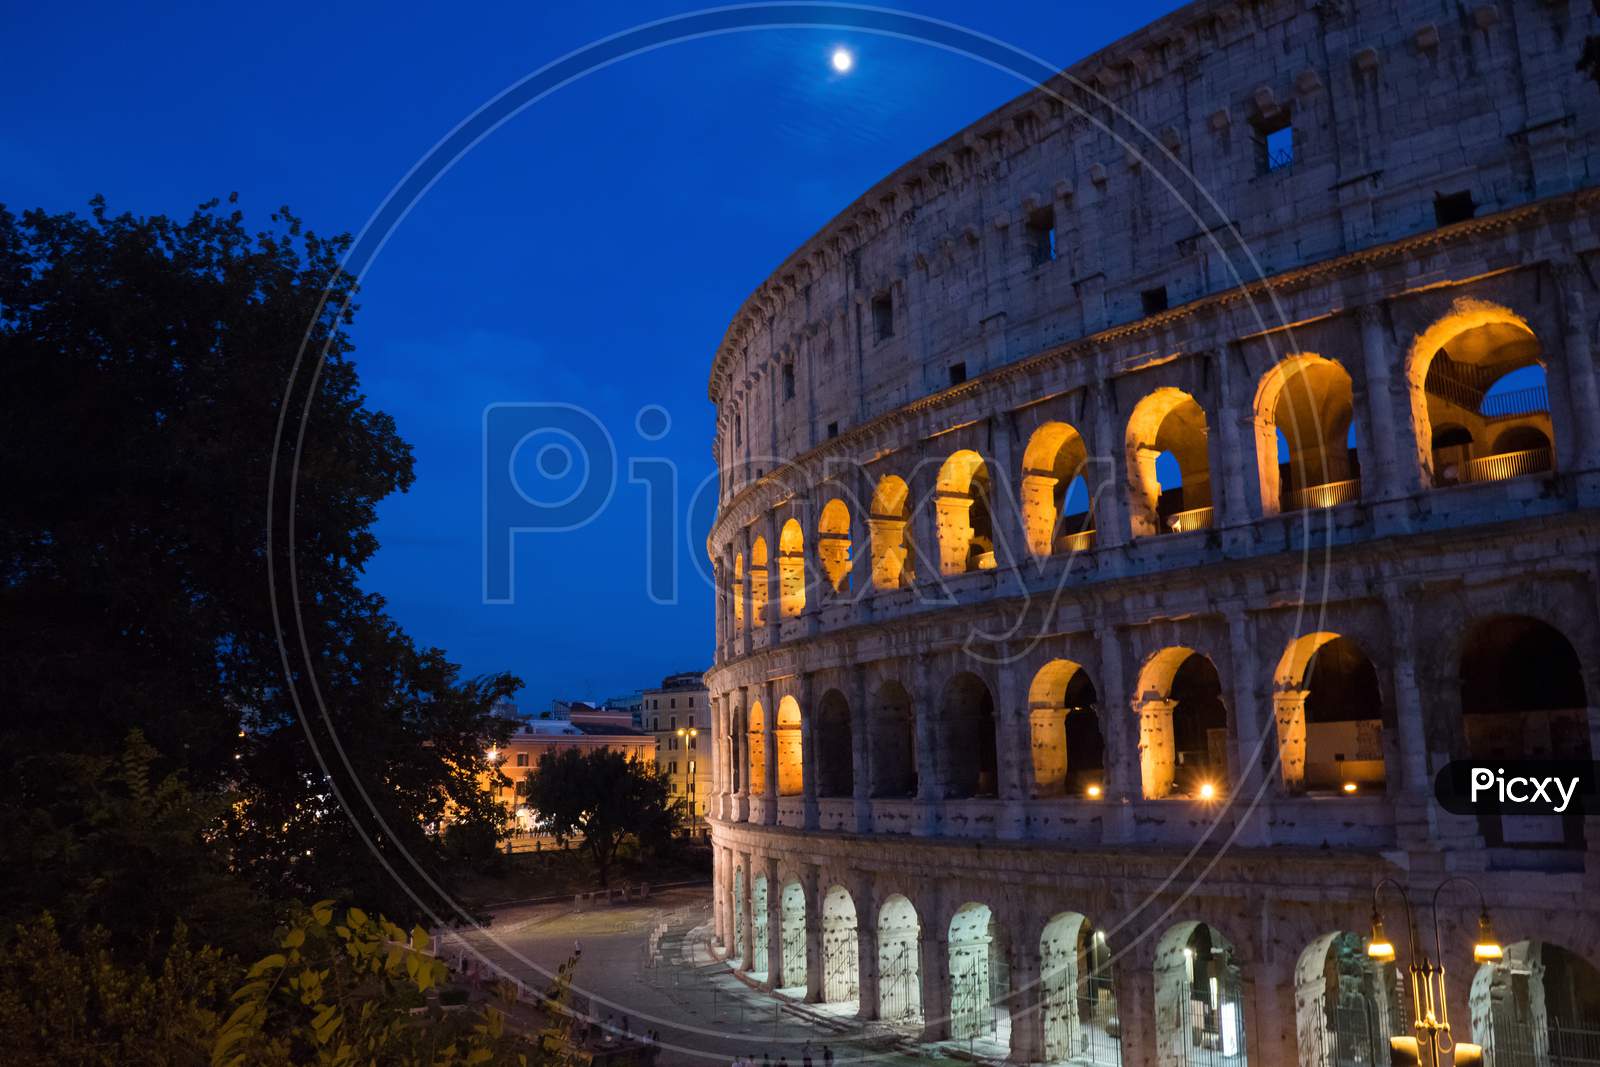 Night At The Great Roman Colosseum (Coliseum, Colosseo), Also Known As The Flavian Amphitheatre With Lights & Illumination.